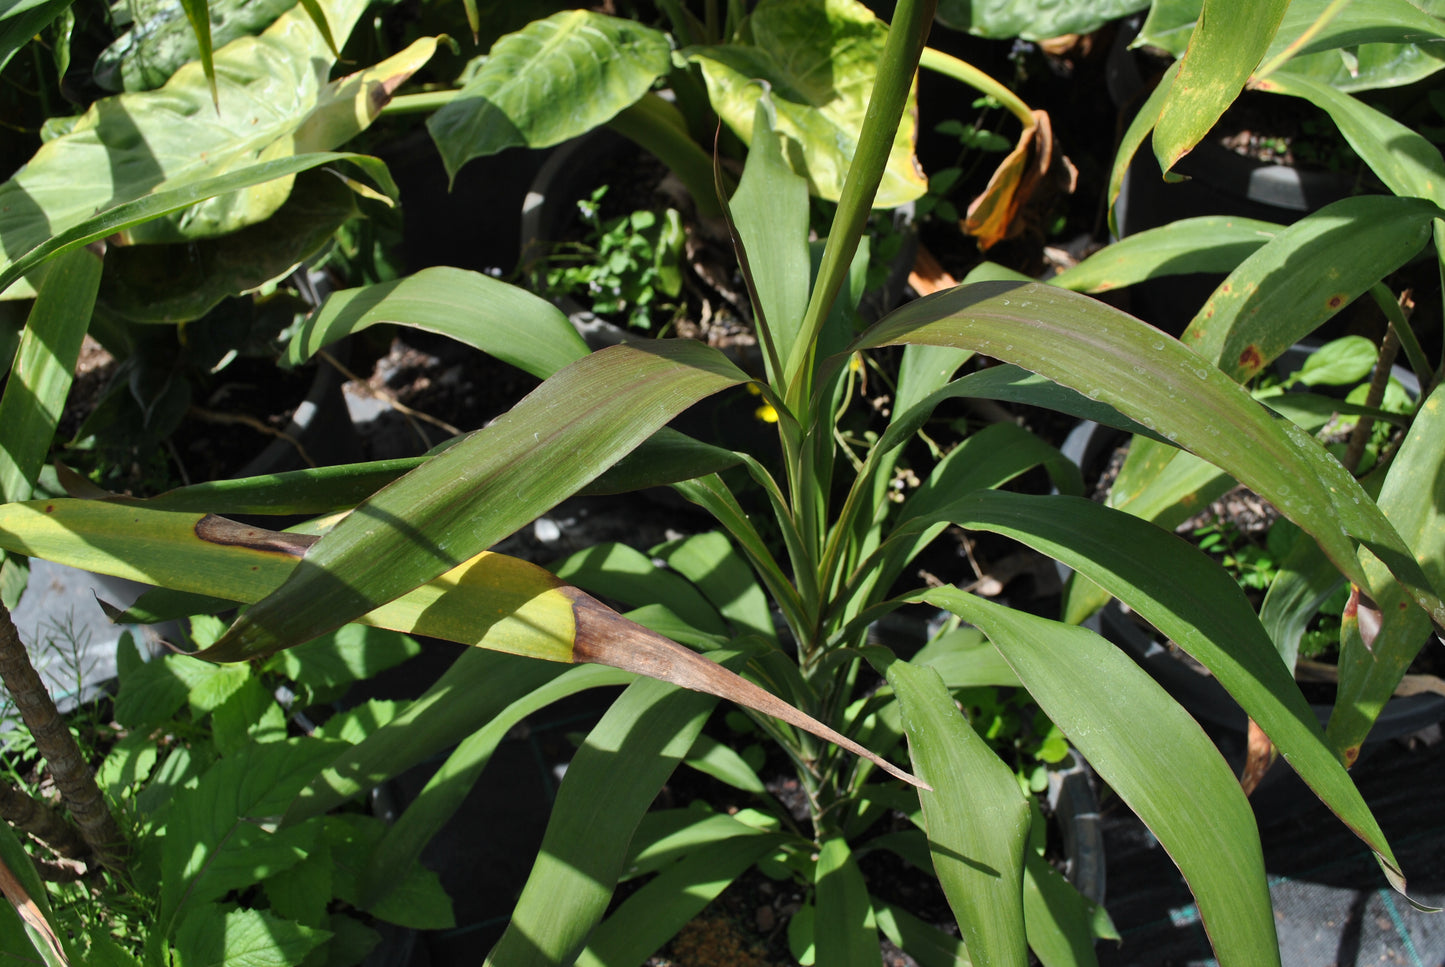 Predominant green foliage with red tinge on Cordyline rubra green